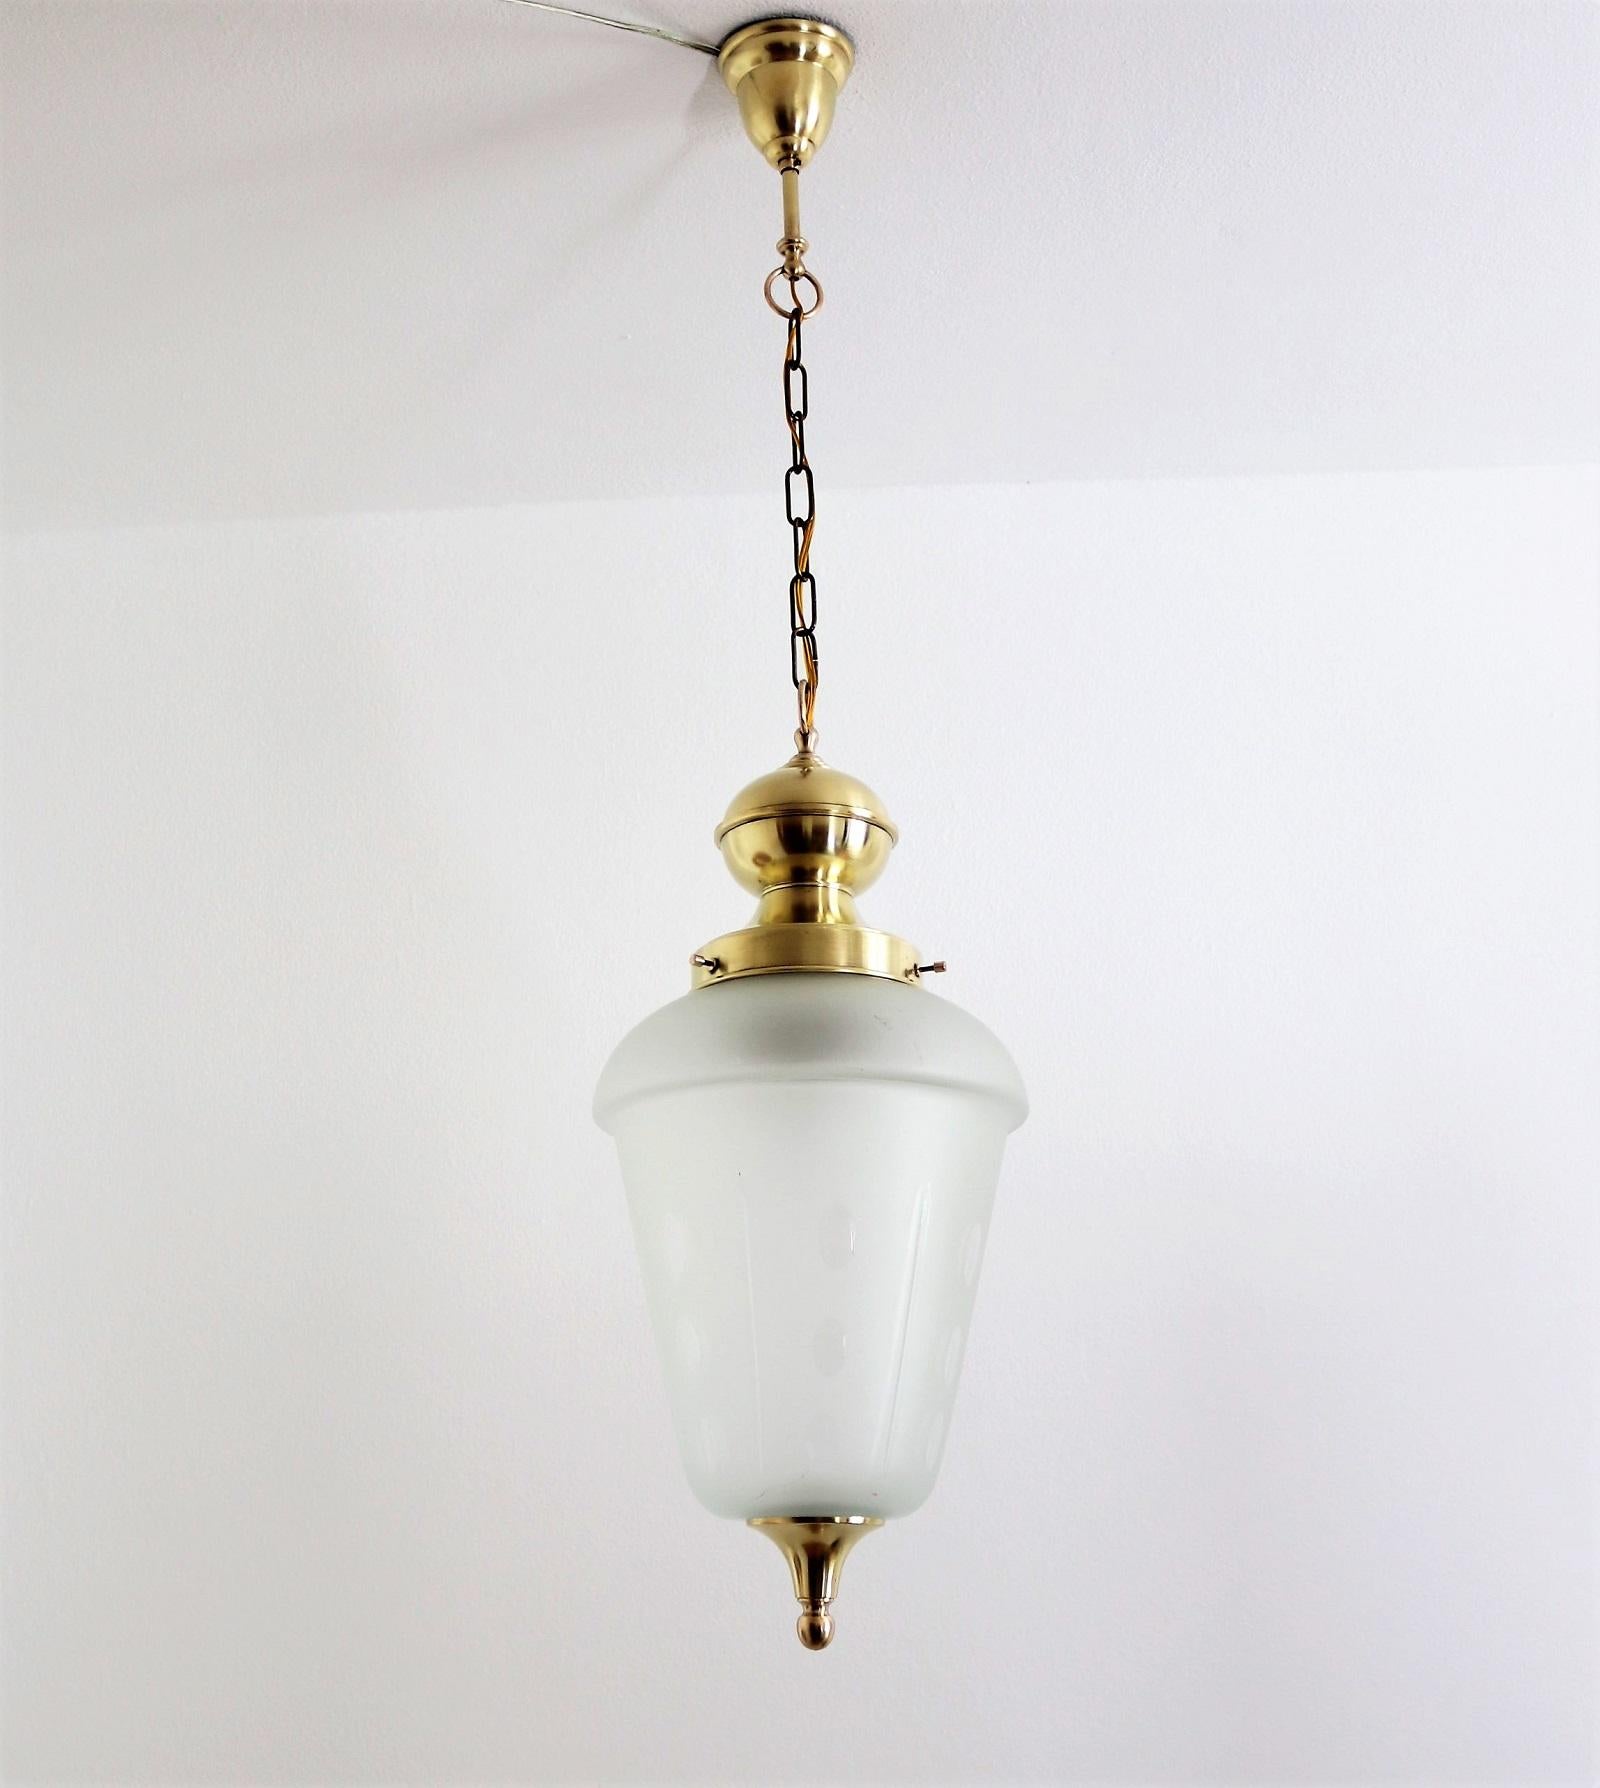 Italian Midcentury Brass and Cut Glass Pendant Lamp or Lantern, 1970s For Sale 5